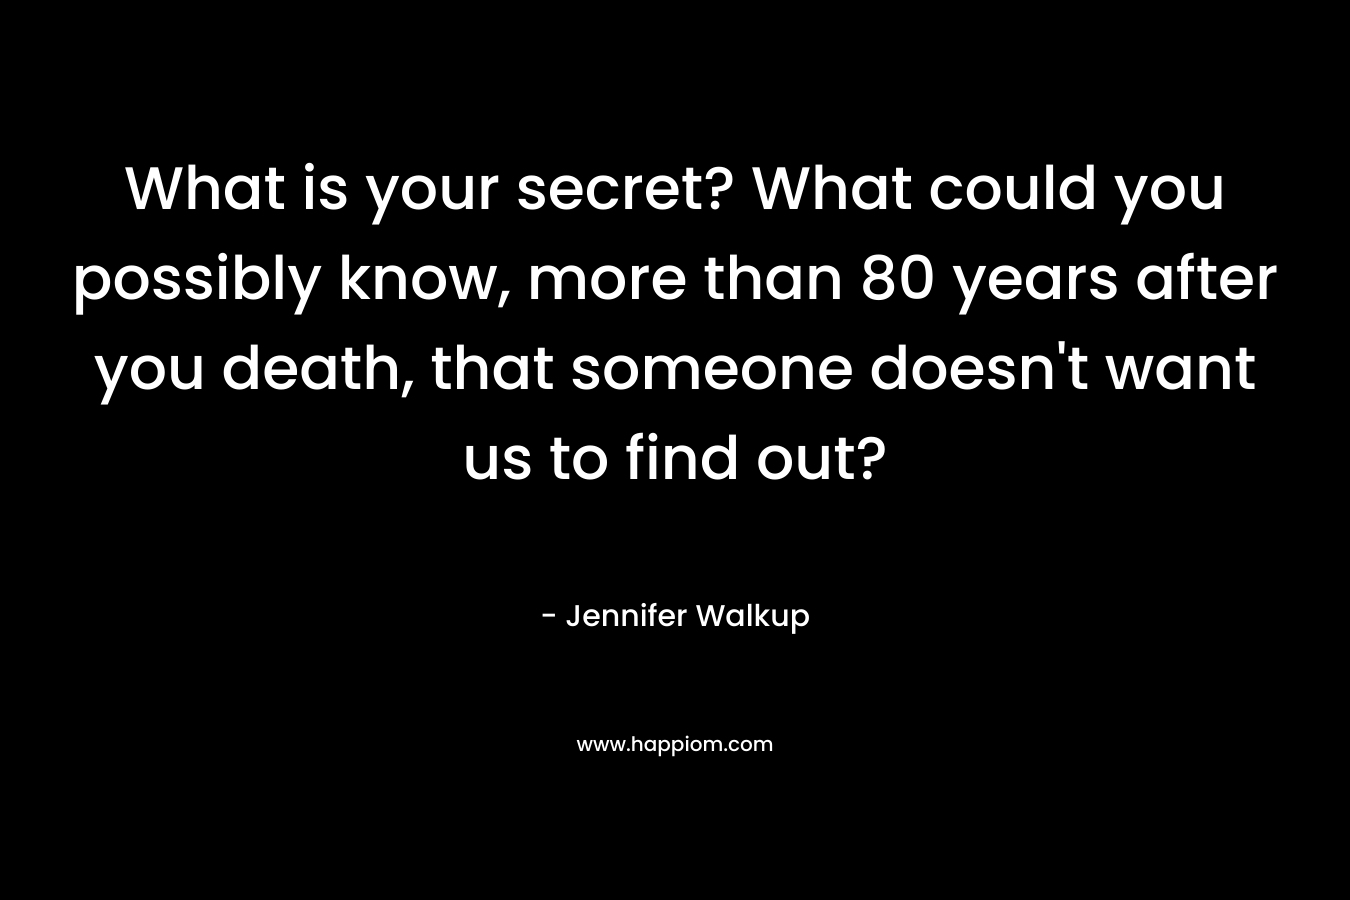 What is your secret? What could you possibly know, more than 80 years after you death, that someone doesn't want us to find out?